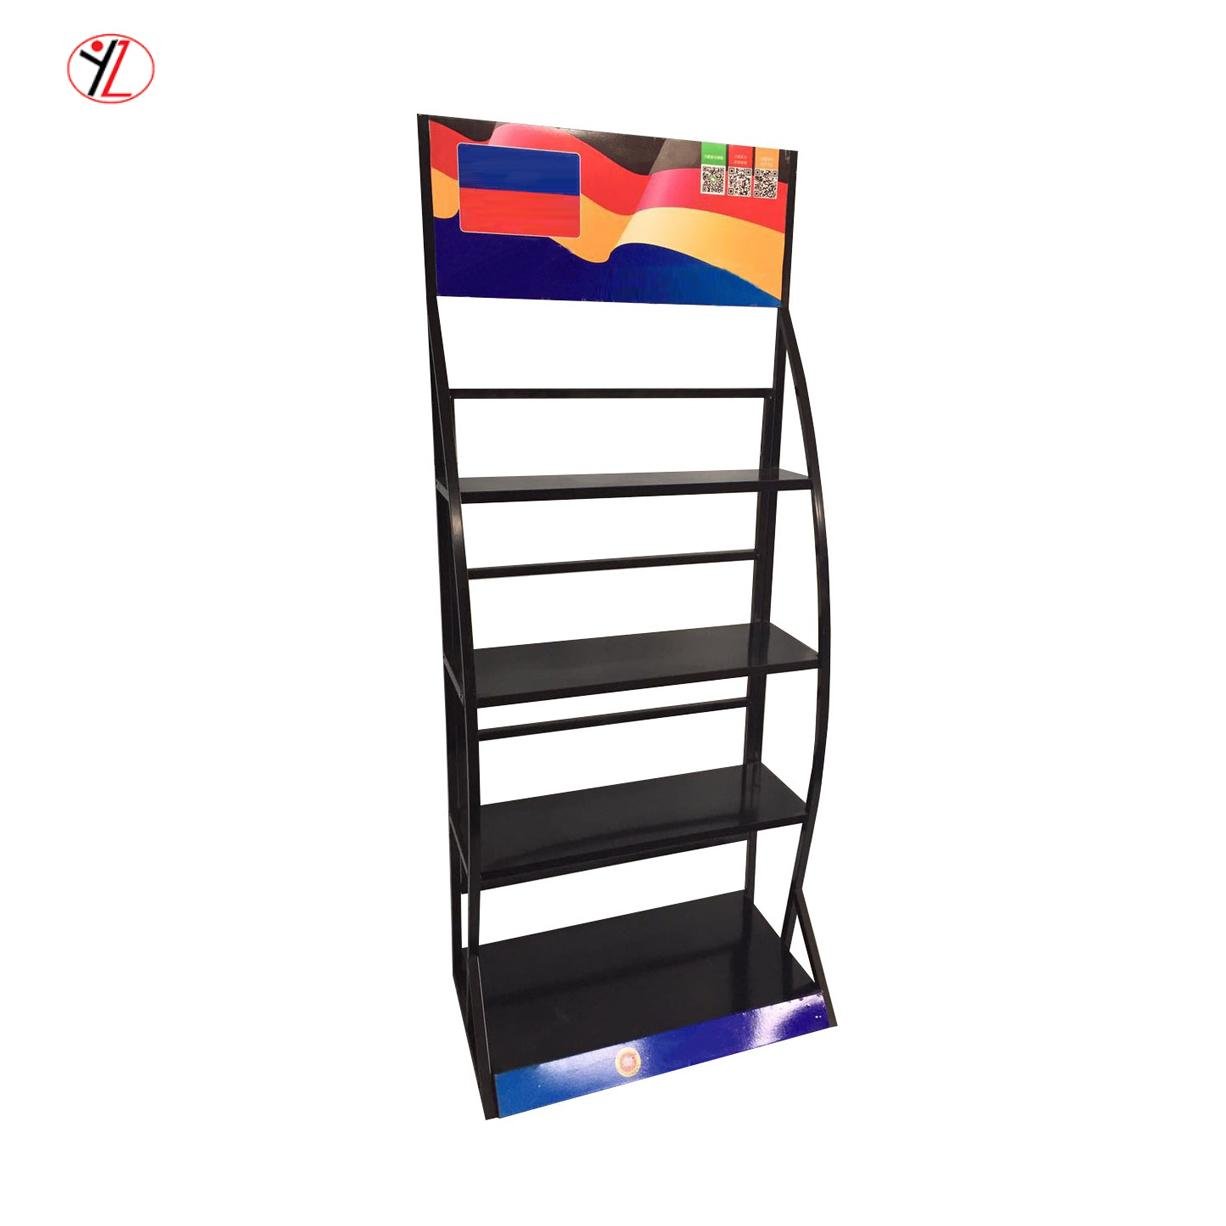 Car Motor Oil Lubricanting Oil Paint Oil Display Stand with Reasonable Price in  3